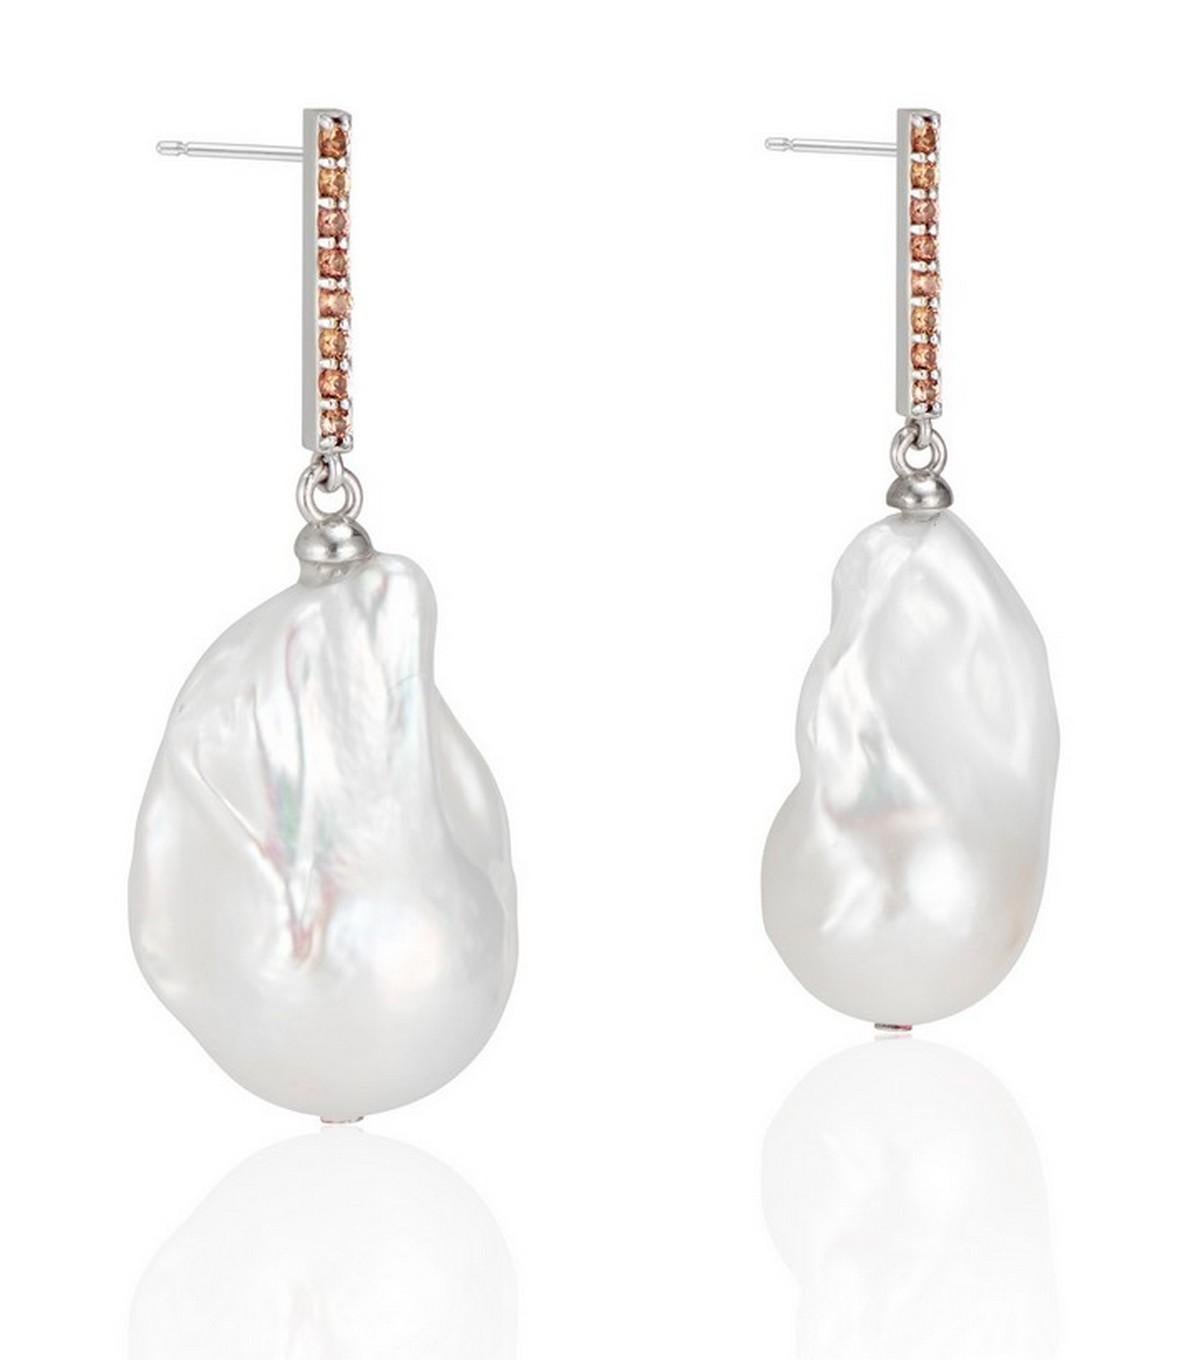 Add a touch of effortless glamour to your wardrobe with these Baroque Pearl earrings.
The hue of orange sapphire against the high polish white gold contrasts beautifully with the pearl, and the shimmering vertical bar gives the earring a very